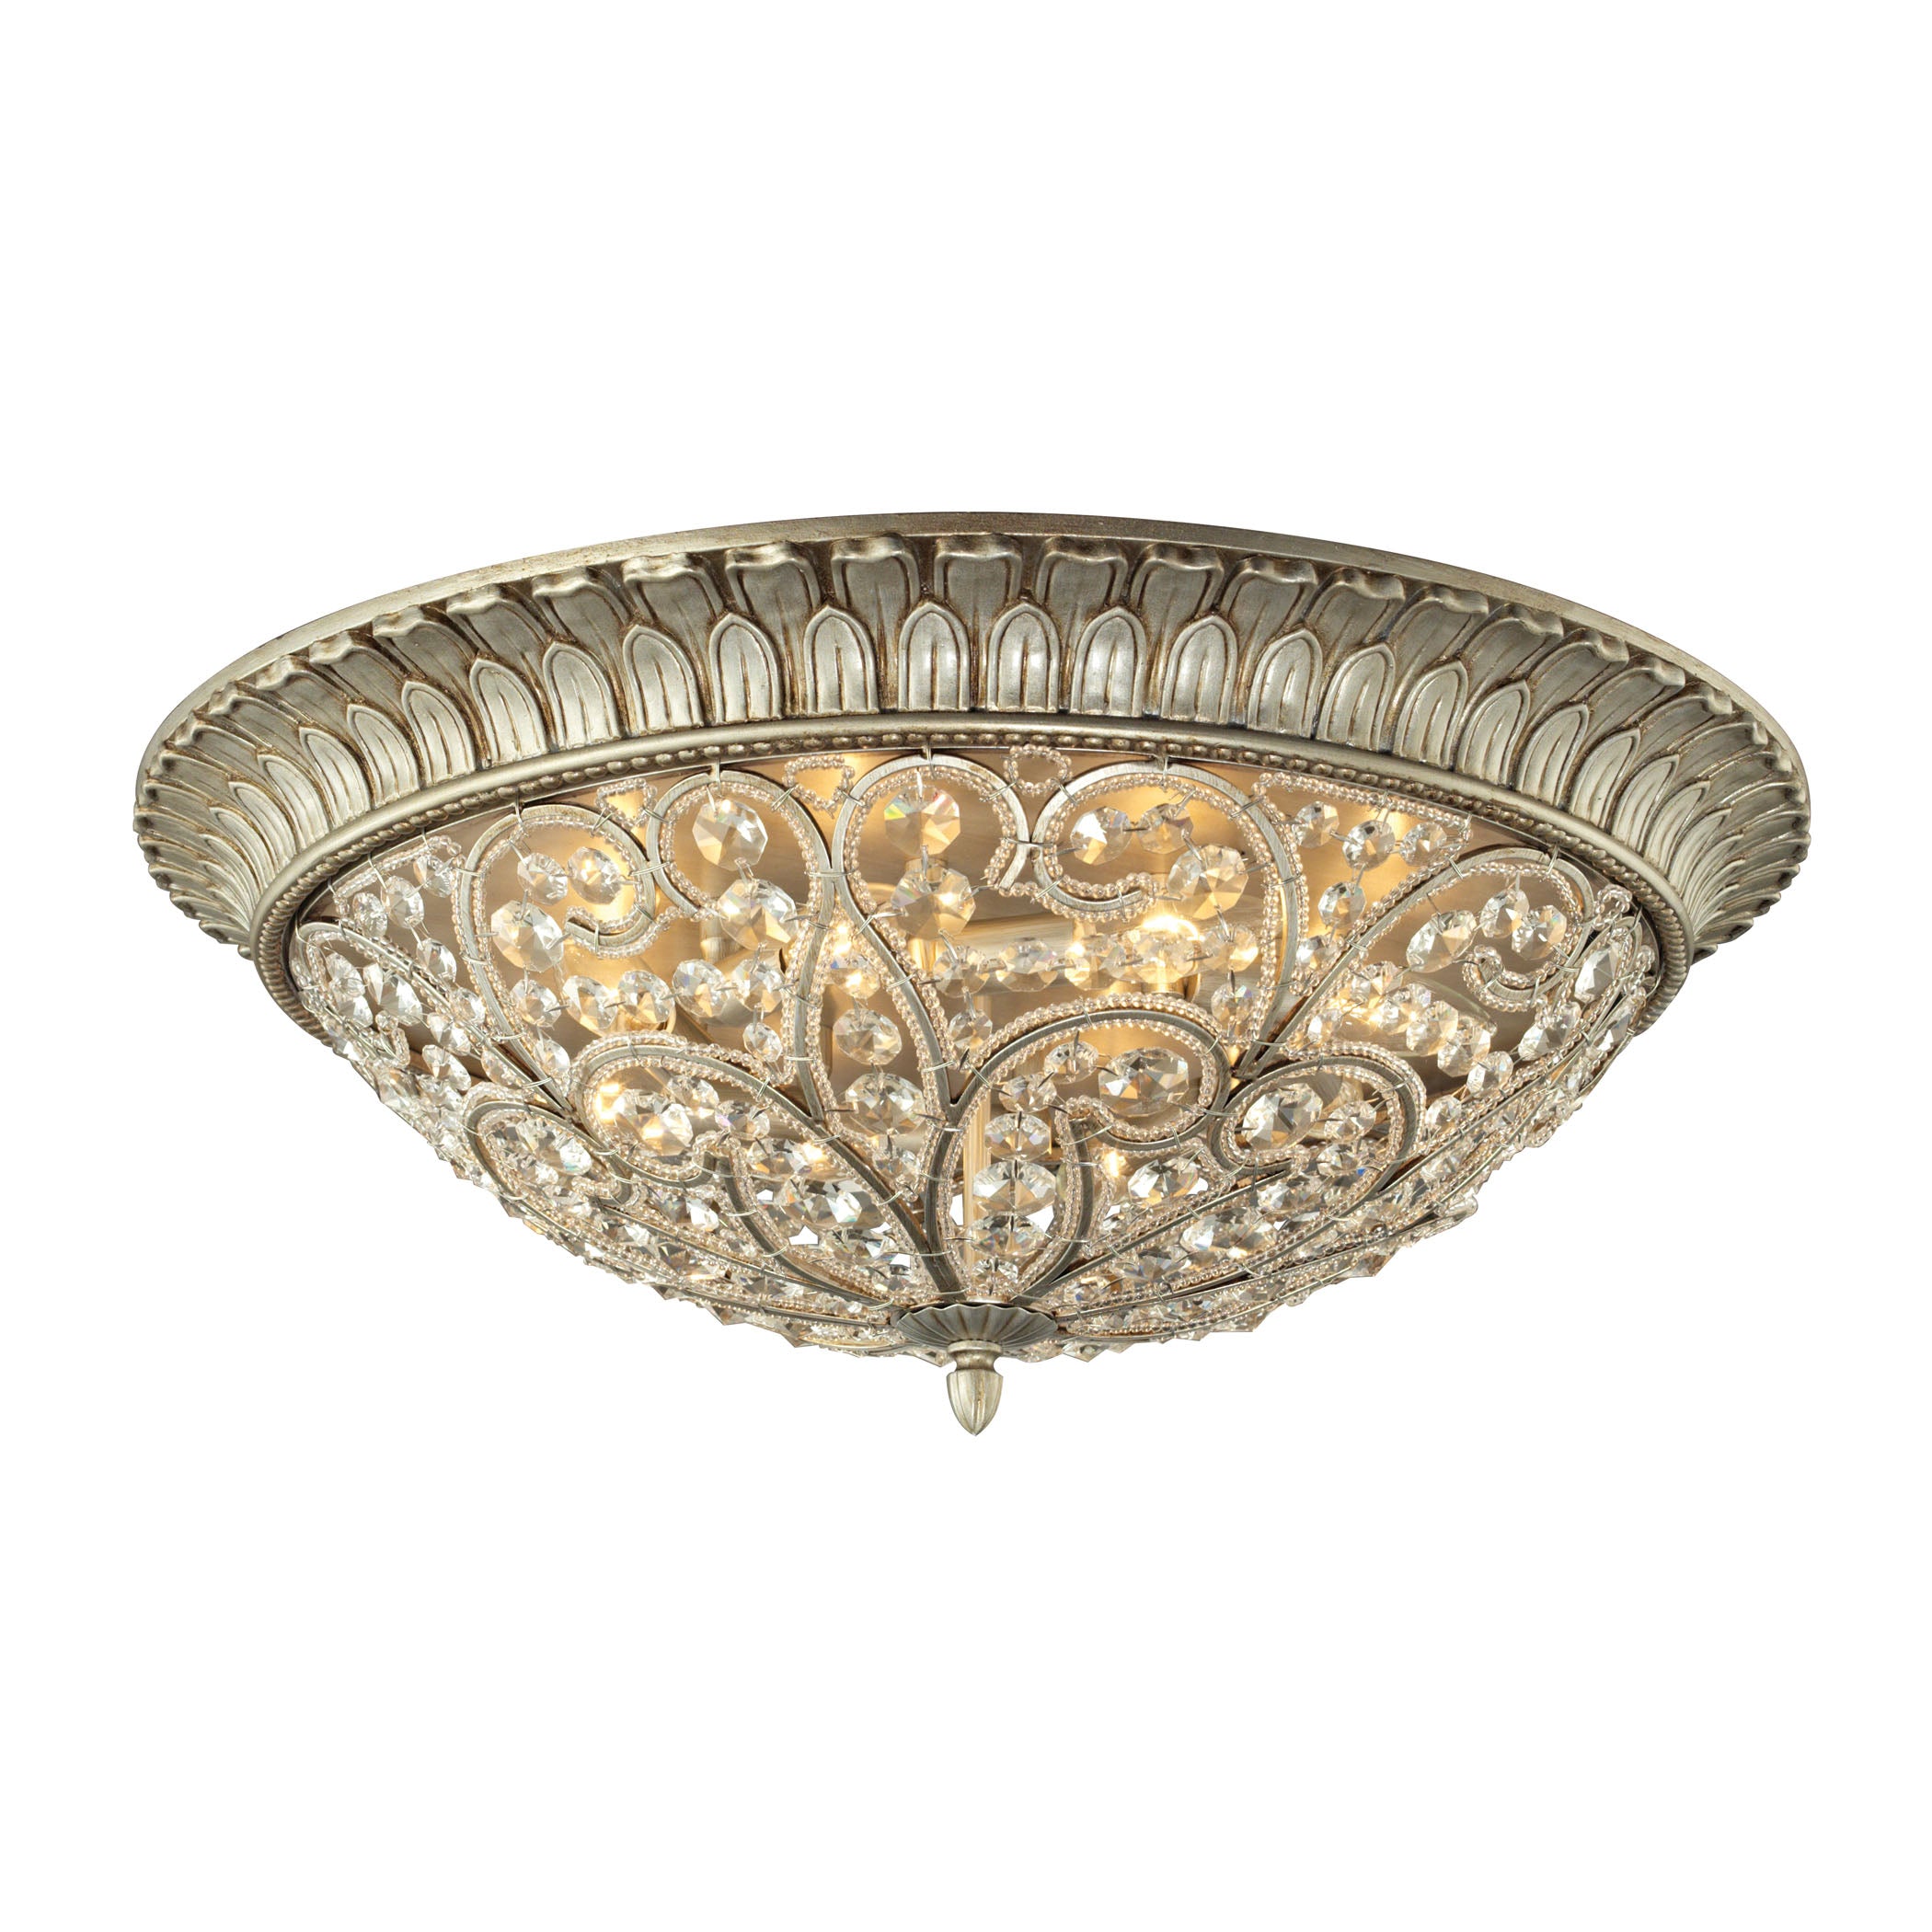 ELK Lighting 11695/8 Andalusia 8-Light Flush Mount in Aged Silver with Clear Crystal and Beaded Glass Diffuser